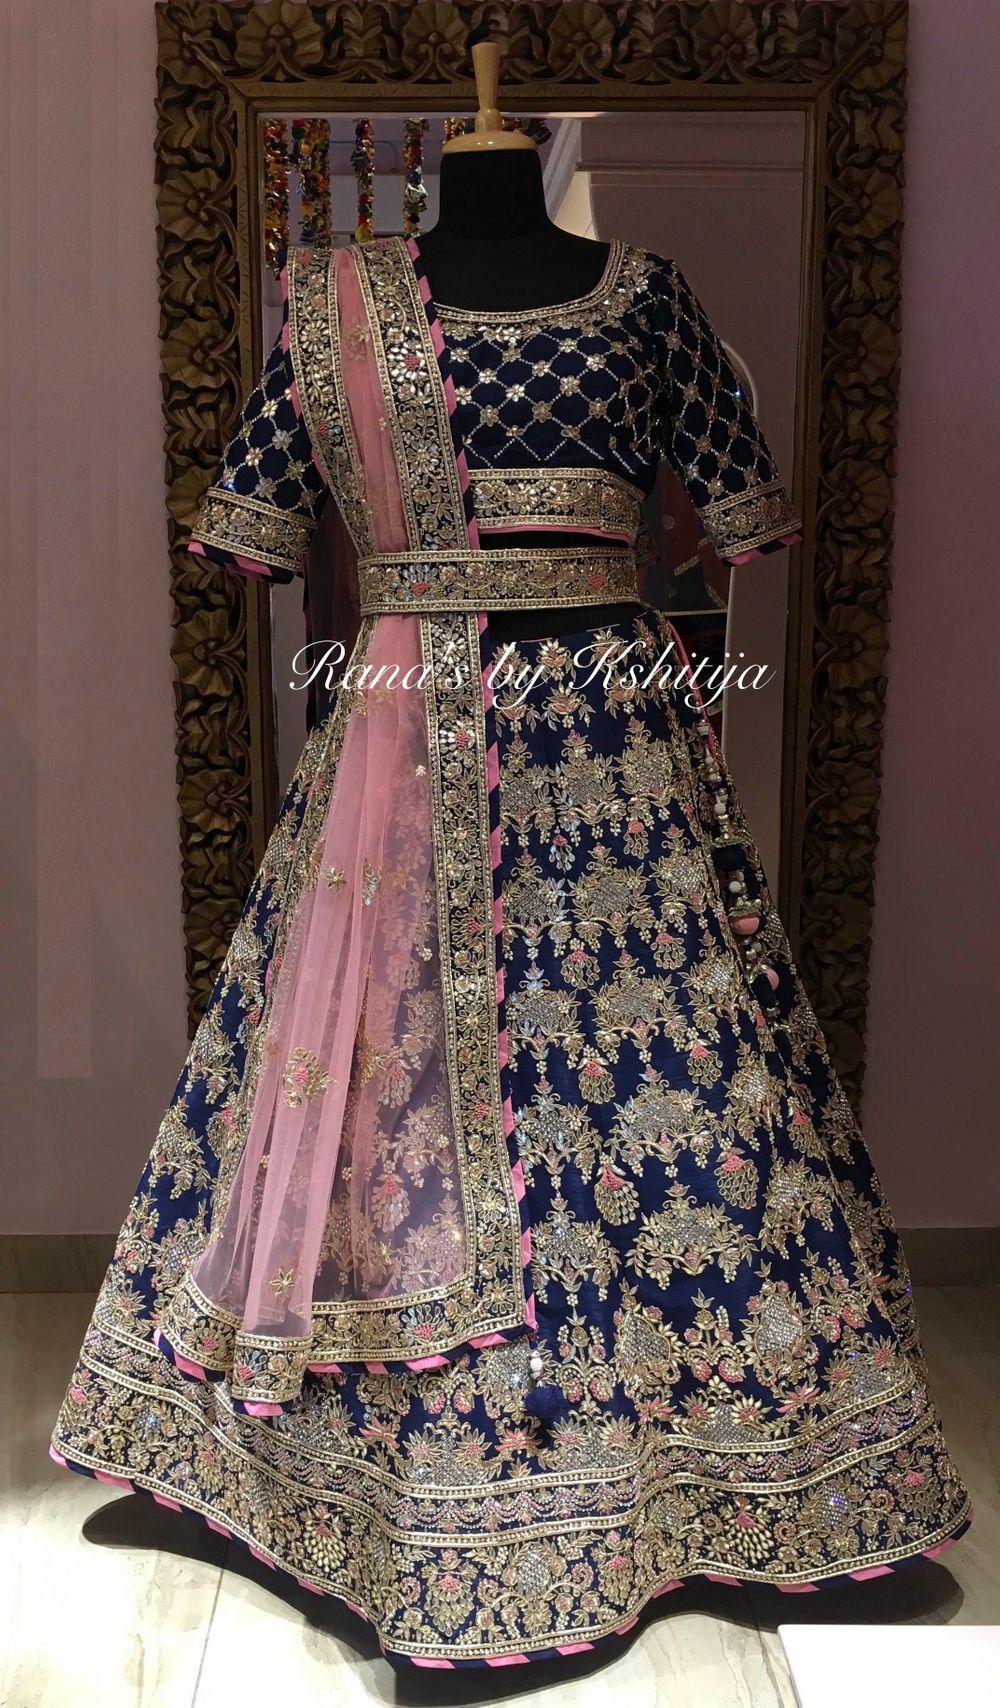 Photo From The Special Bridal Lehenga/Outfit Collection - By RANA'S by Kshitija